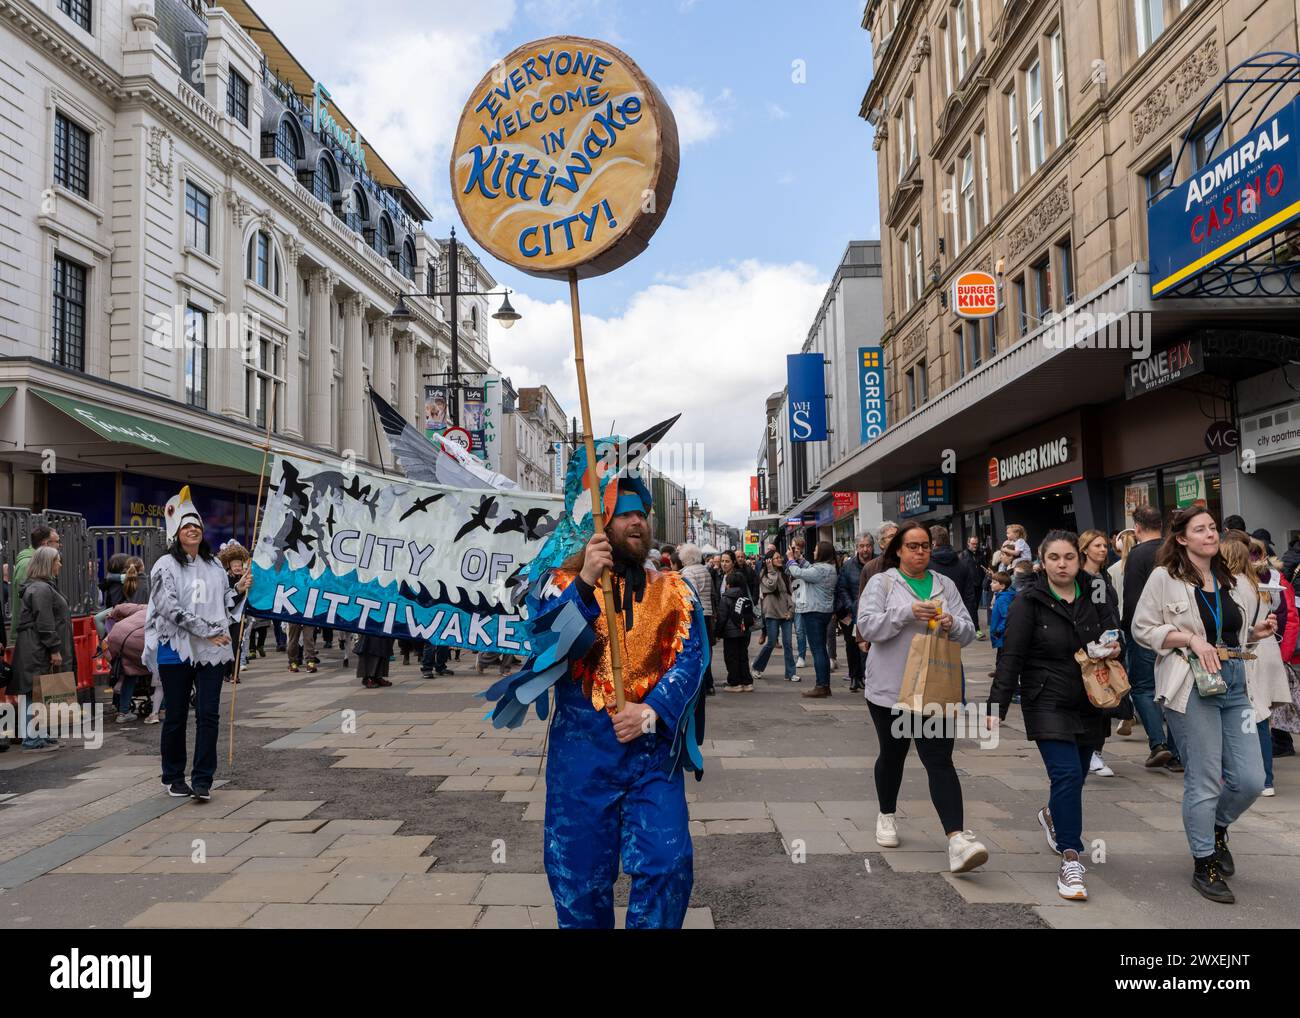 Newcastle upon Tyne, UK. 30th March 2024. Beasts on the Street, puppet performances on Northumberland Street in the city, as Newcastle Puppetry Festival is launched. The festival runs until 7th April. -- Pictured: City of Kittiwakes Parade. Credit: Hazel Plater/Alamy Live News Stock Photo